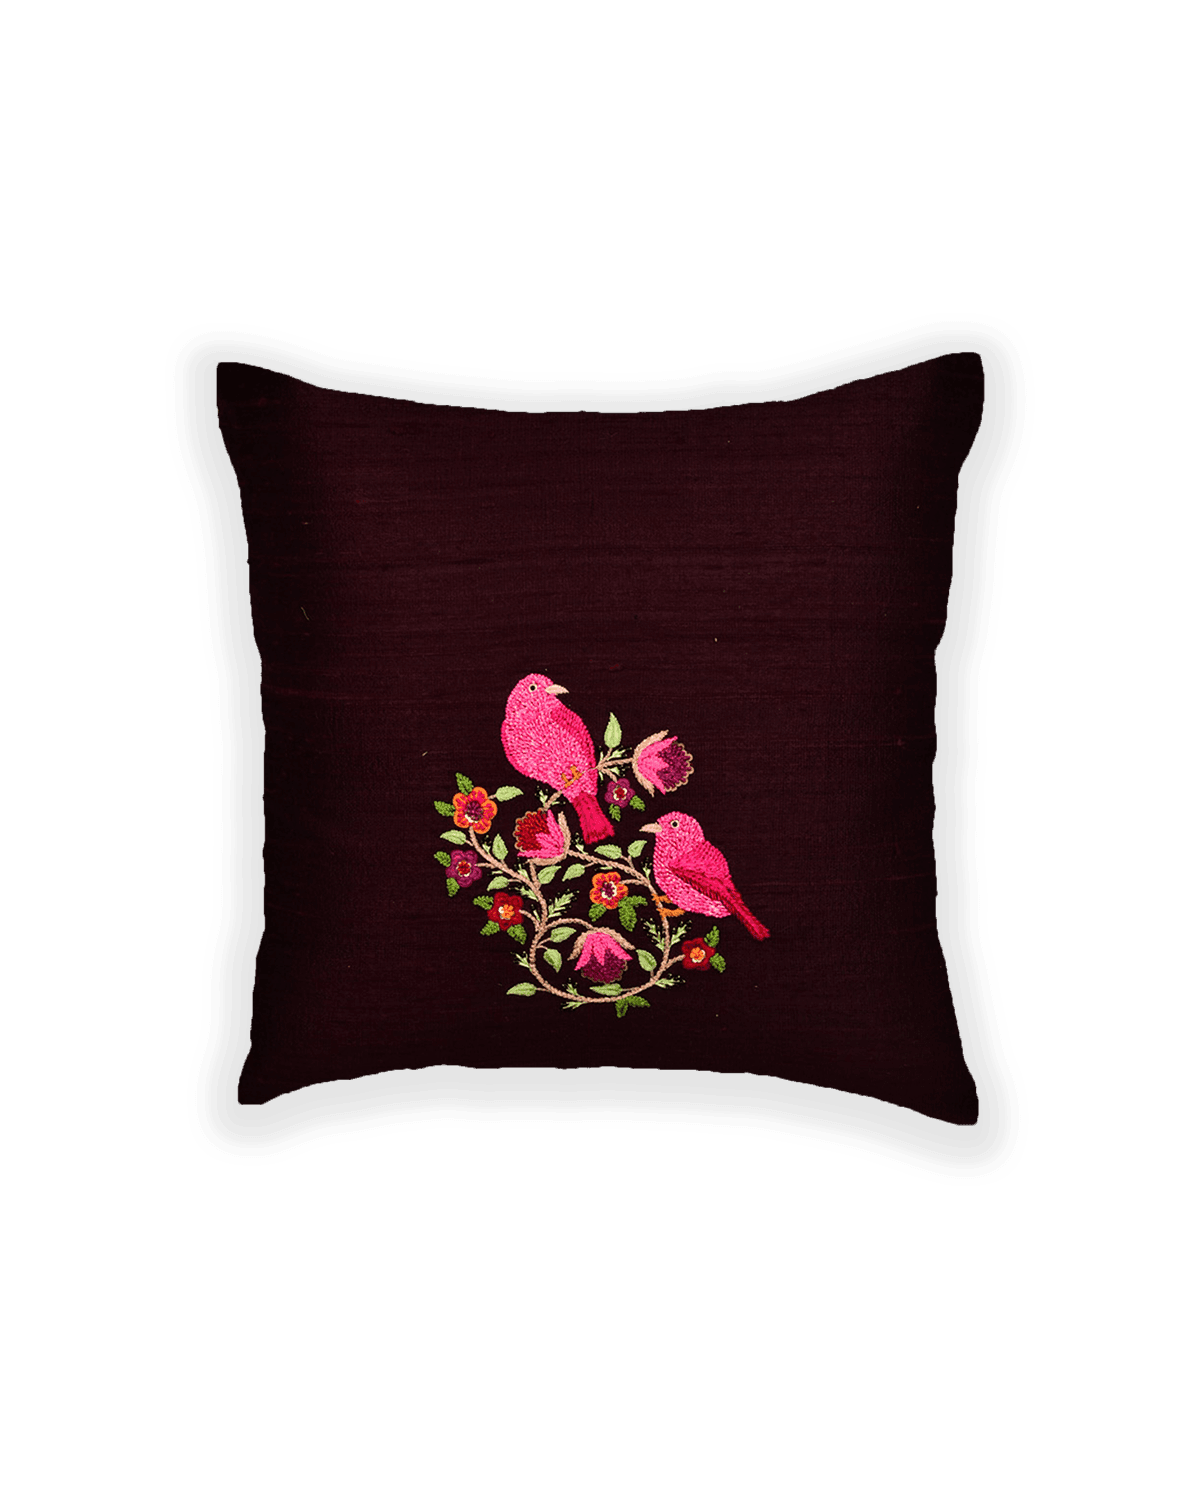 Mahogany Hand-embroidered Raw Silk Cushion Cover with Satin Back 16" - By HolyWeaves, Benares